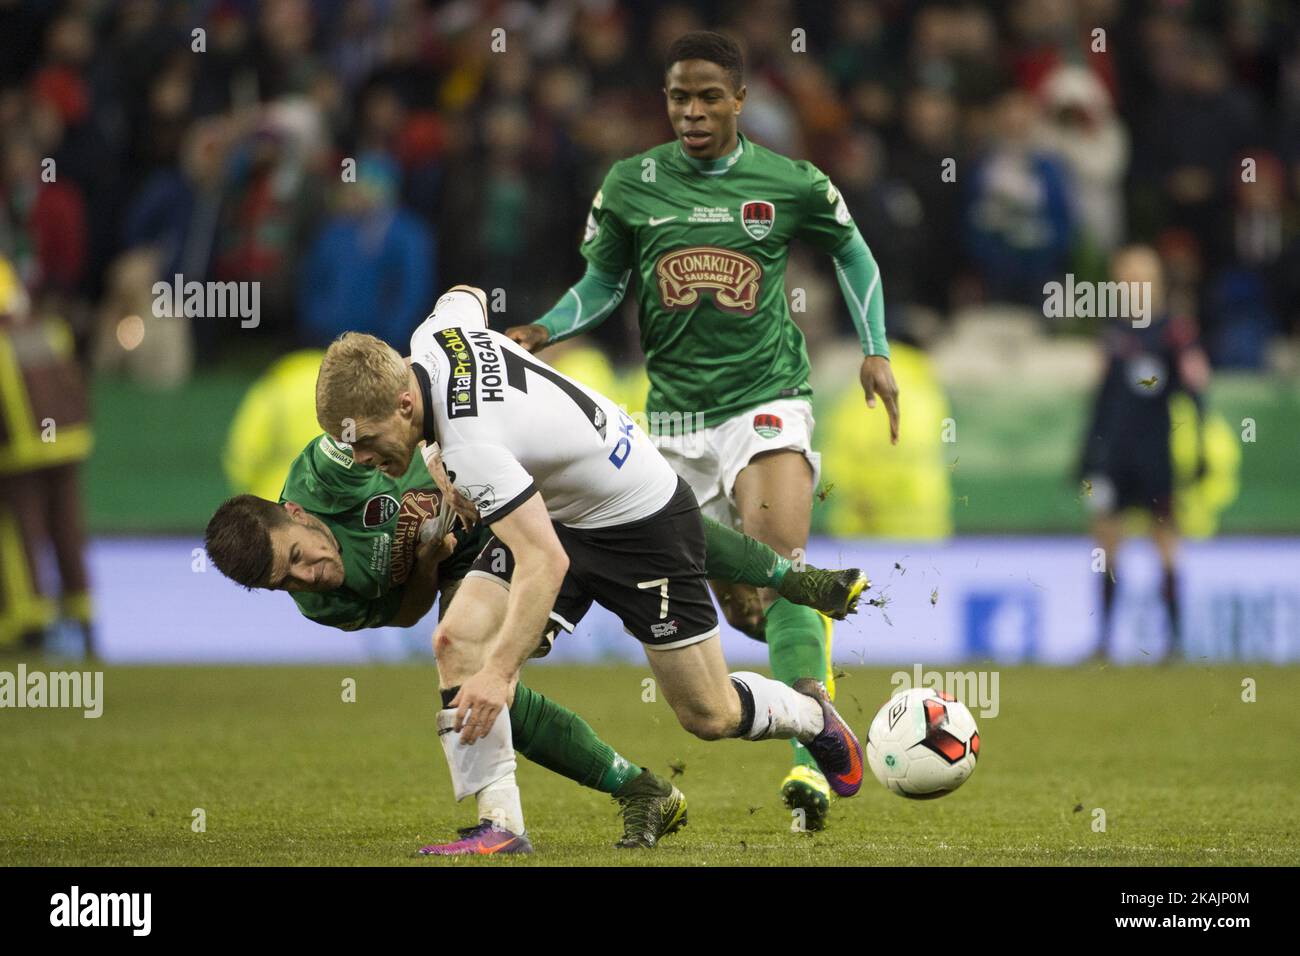 Daryl Horgan of Dundalk duels with Steven Beattie of Cork during the Irish Daily Mail FAI Senior Cup Final 2016 match between Cork City and Dundalk FC at Aviva Stadium in Dublin, Ireland on November 6, 2016.  Stock Photo